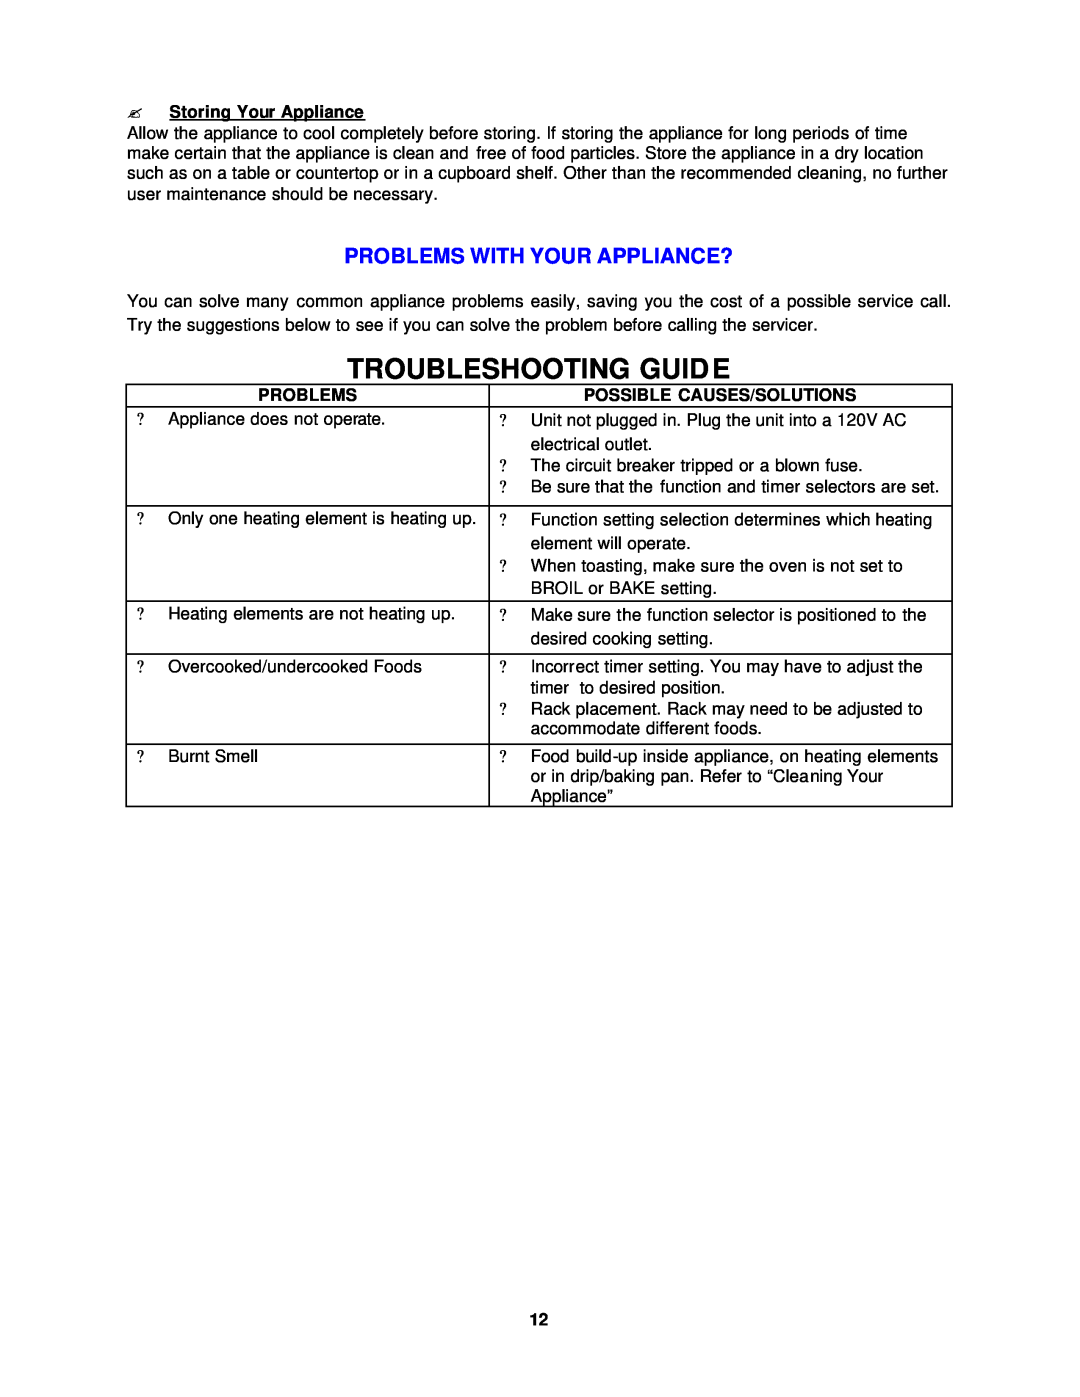 Avanti T-9 Troubleshooting Guide, Problems With Your Appliance?, ? Storing Your Appliance, Possible Causes/Solutions 